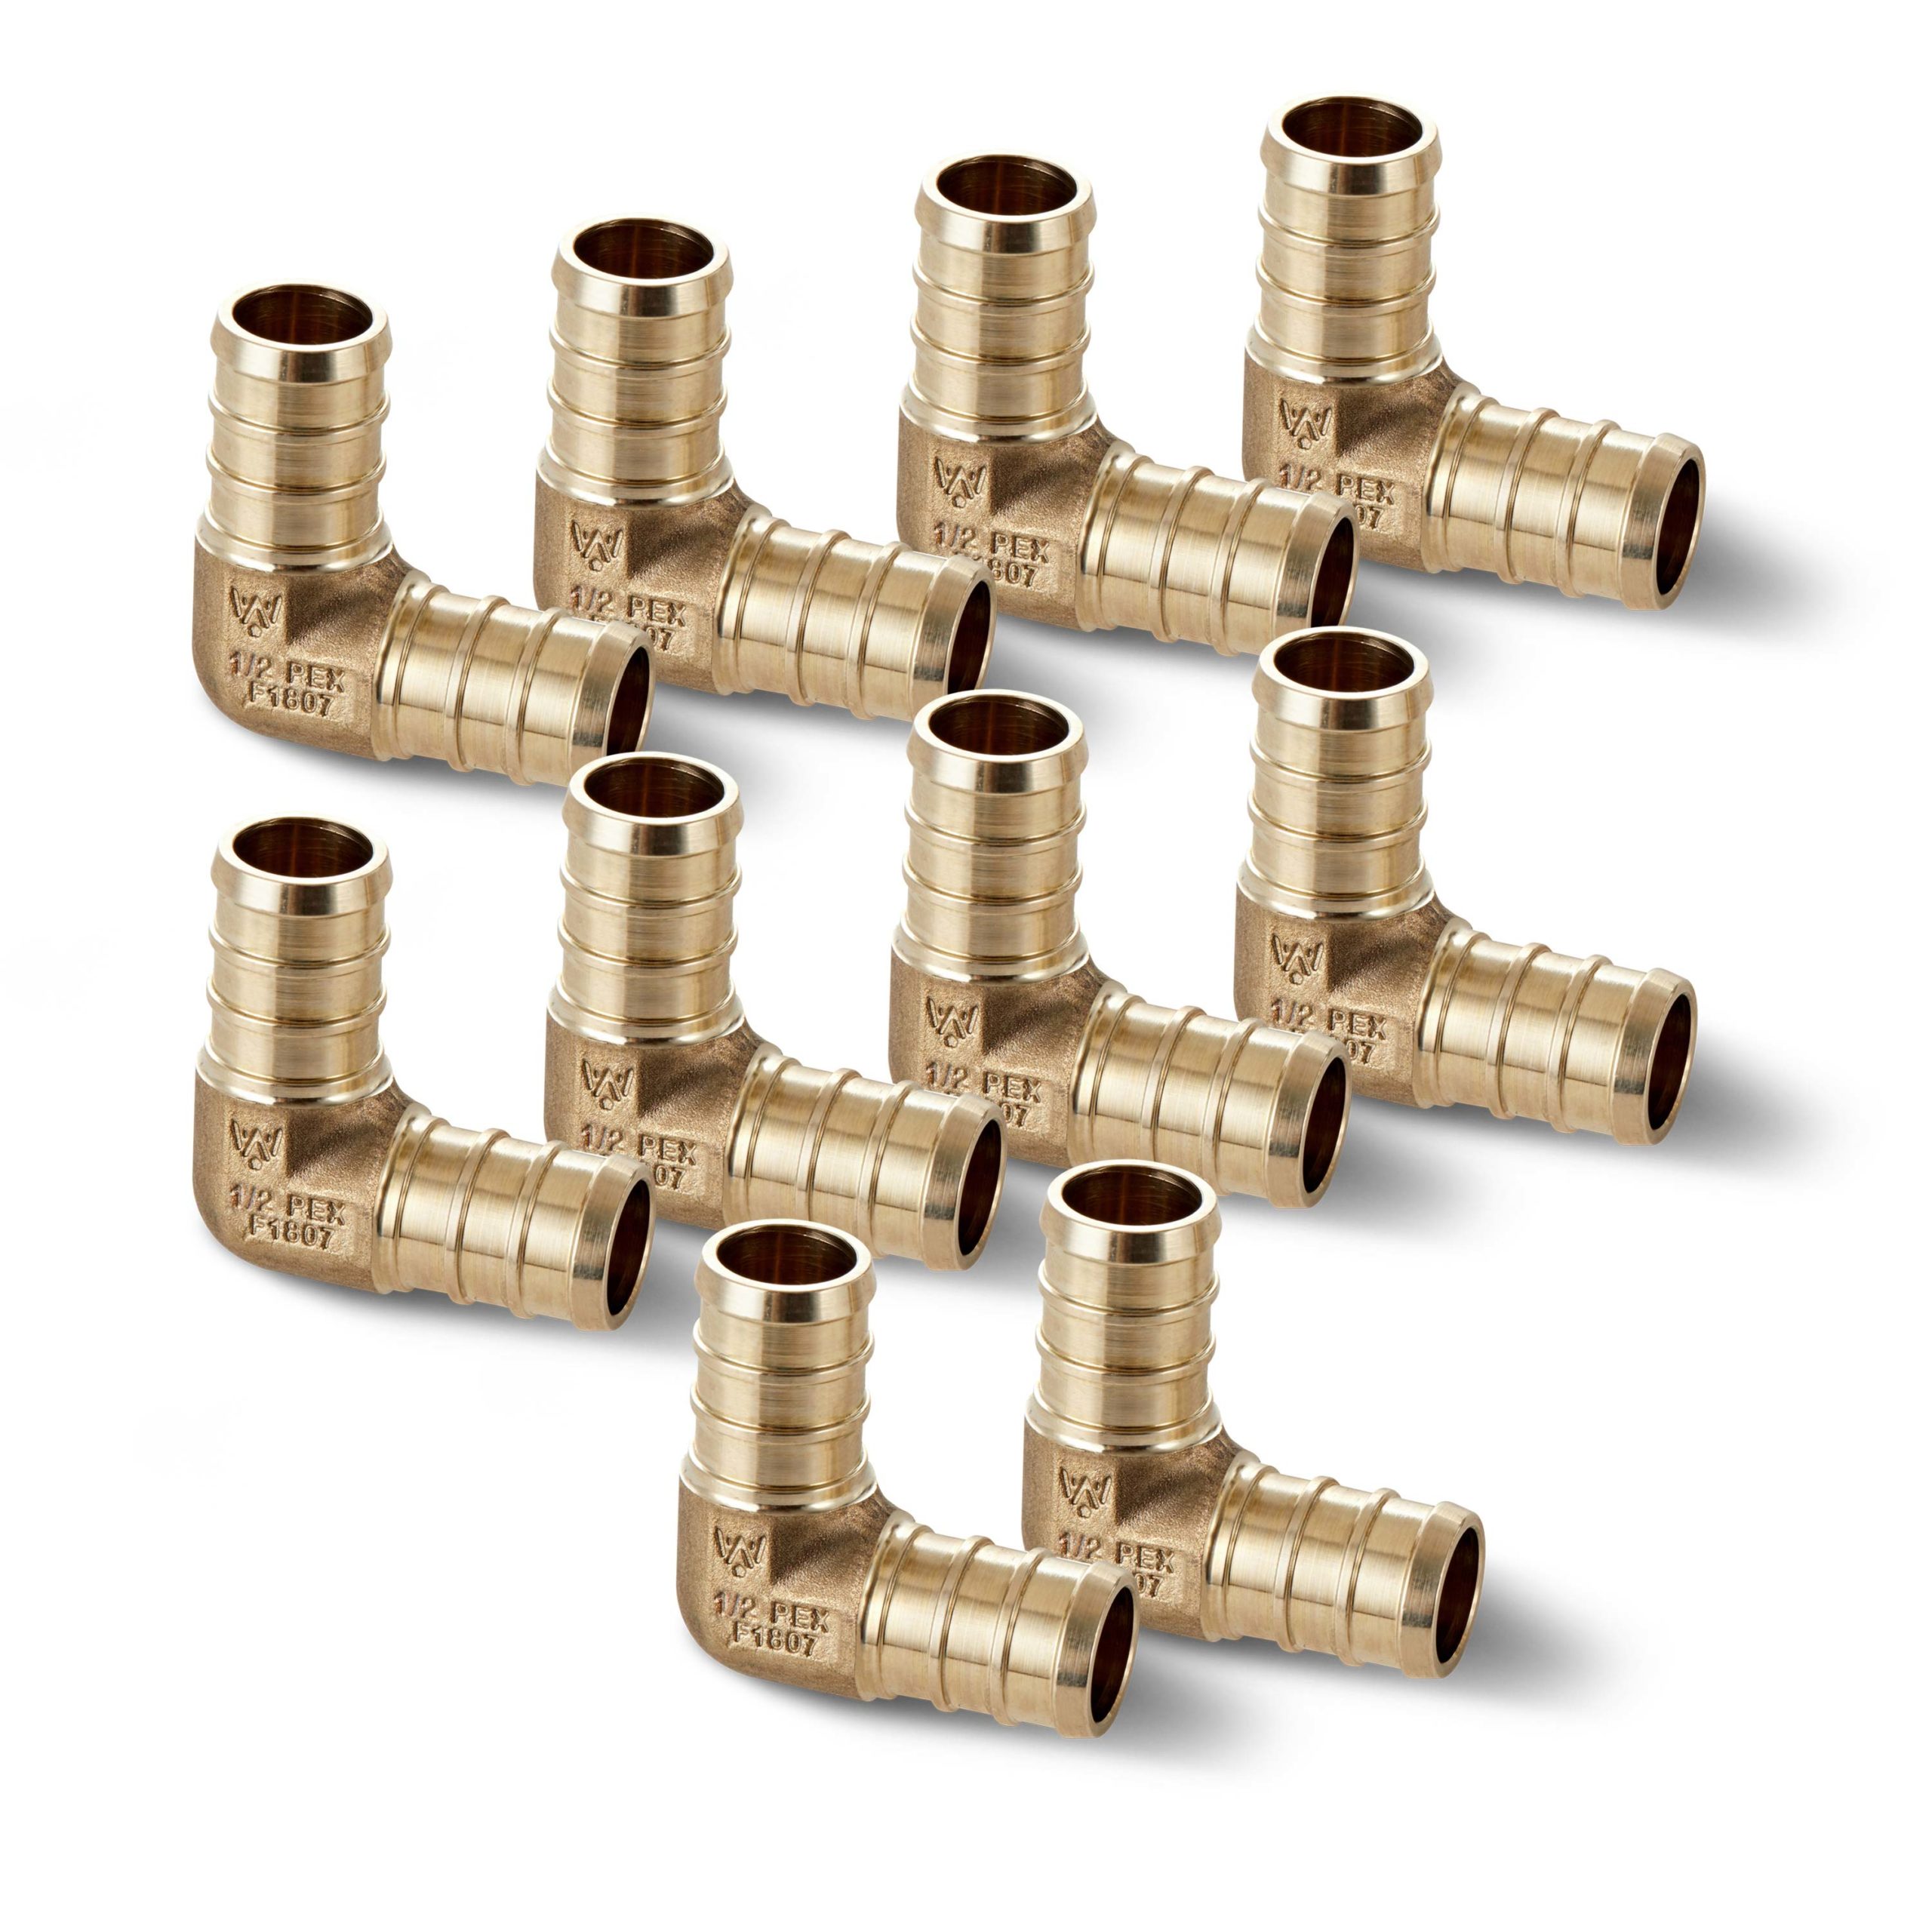 1/2" PEX Elbows 50 Poly Alloy Lead-Free Crimp Fittings 